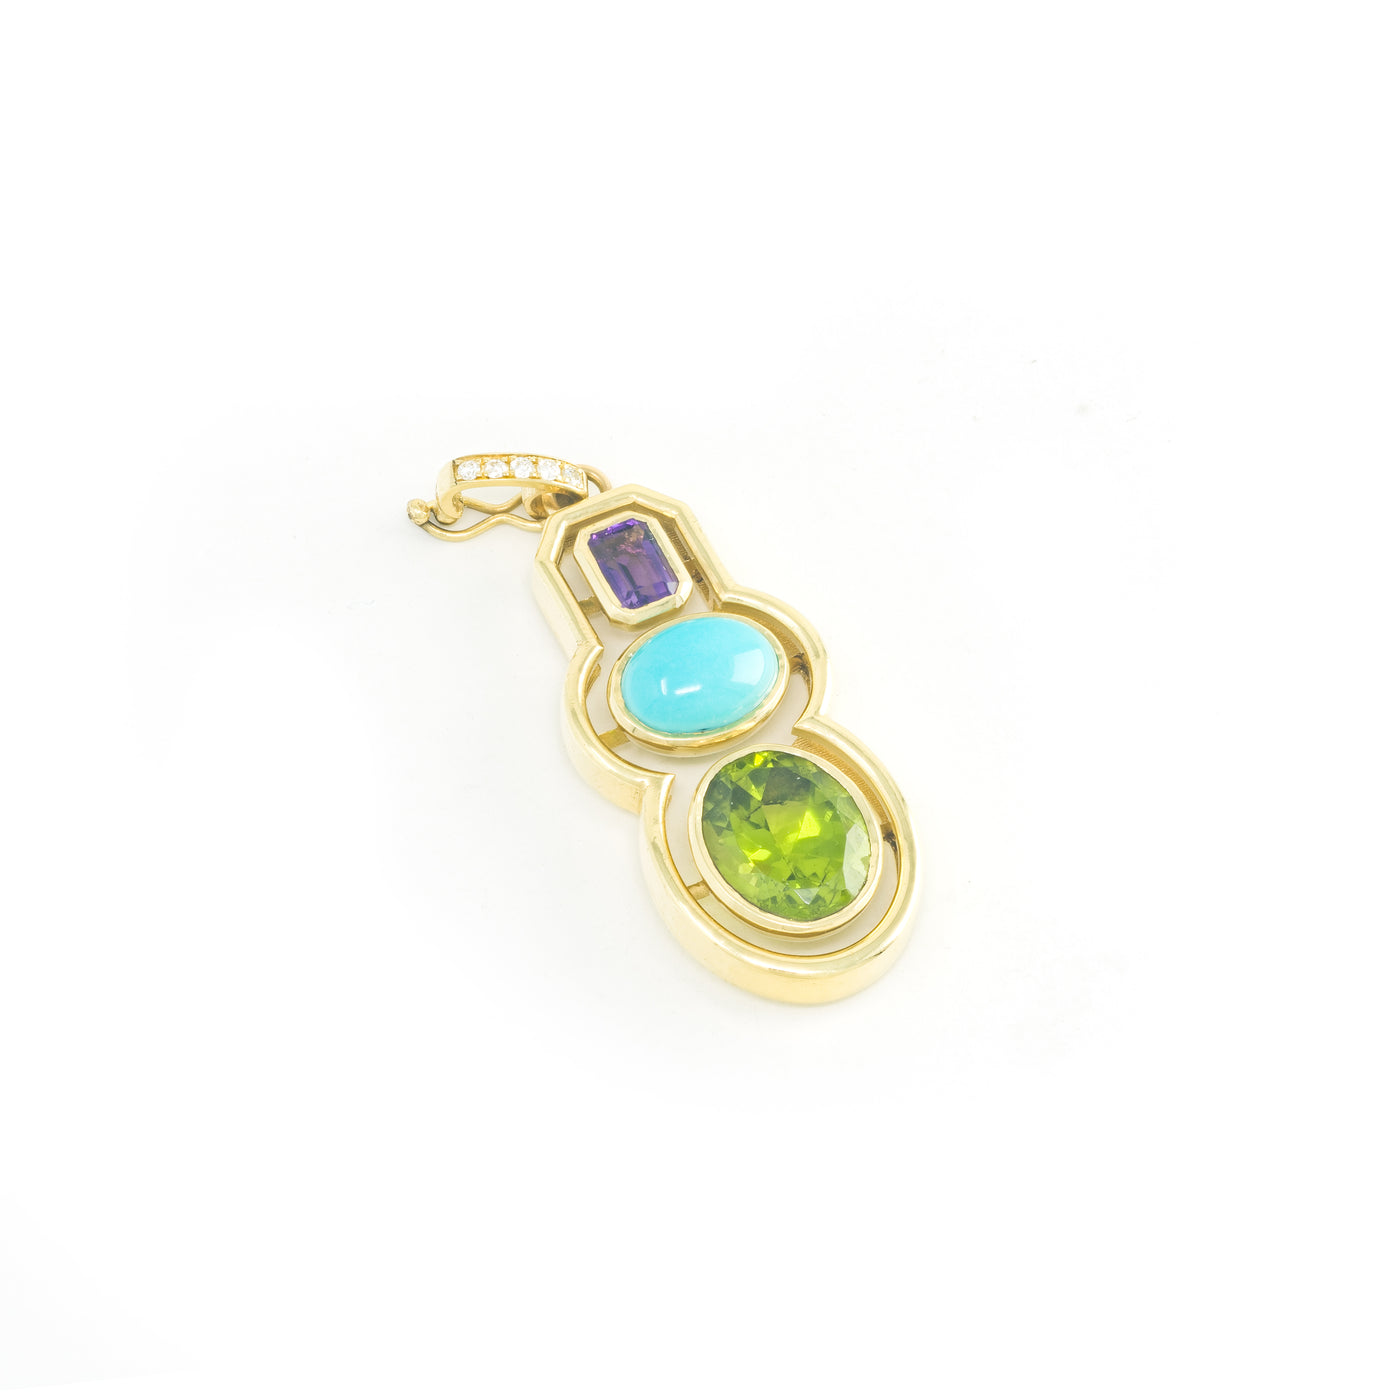 Amethyst, Turquoise and Peridot Morse Code Shadow Charm